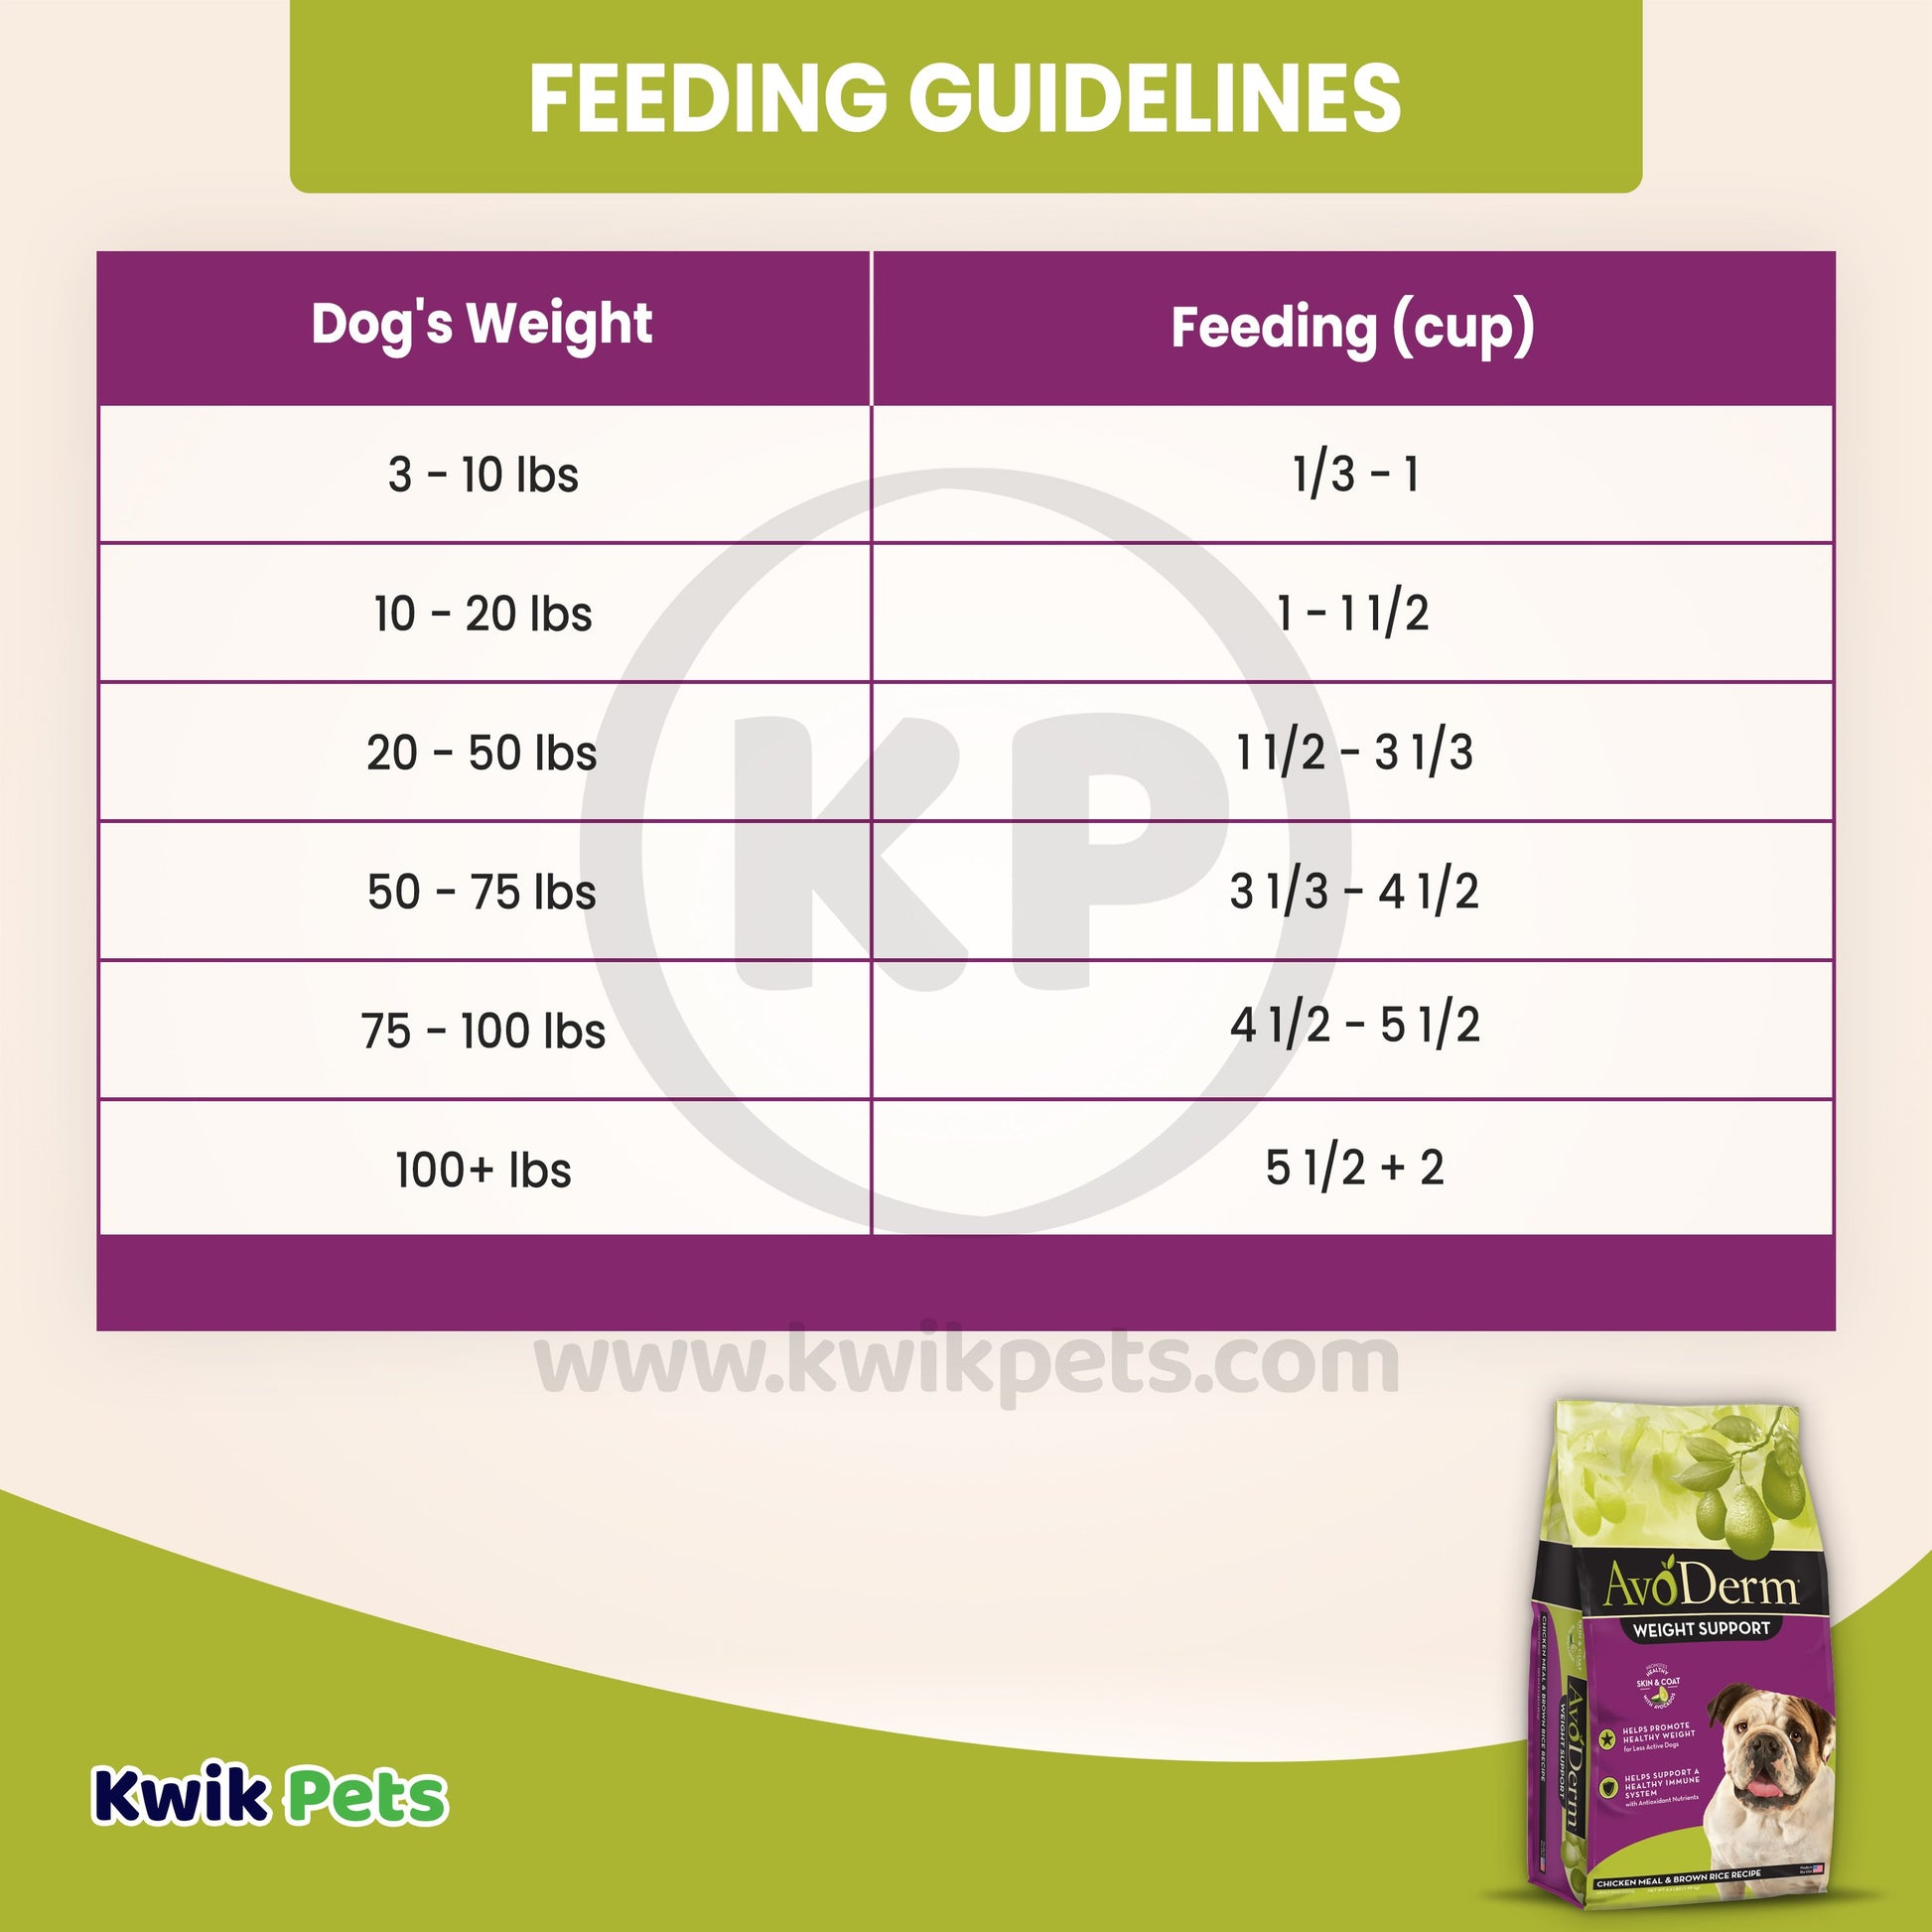 AvoDerm Natural Weight Support Chicken Meal & Brown Rice Recipe Dry Dog Food 4.4 lb, AvoDerm